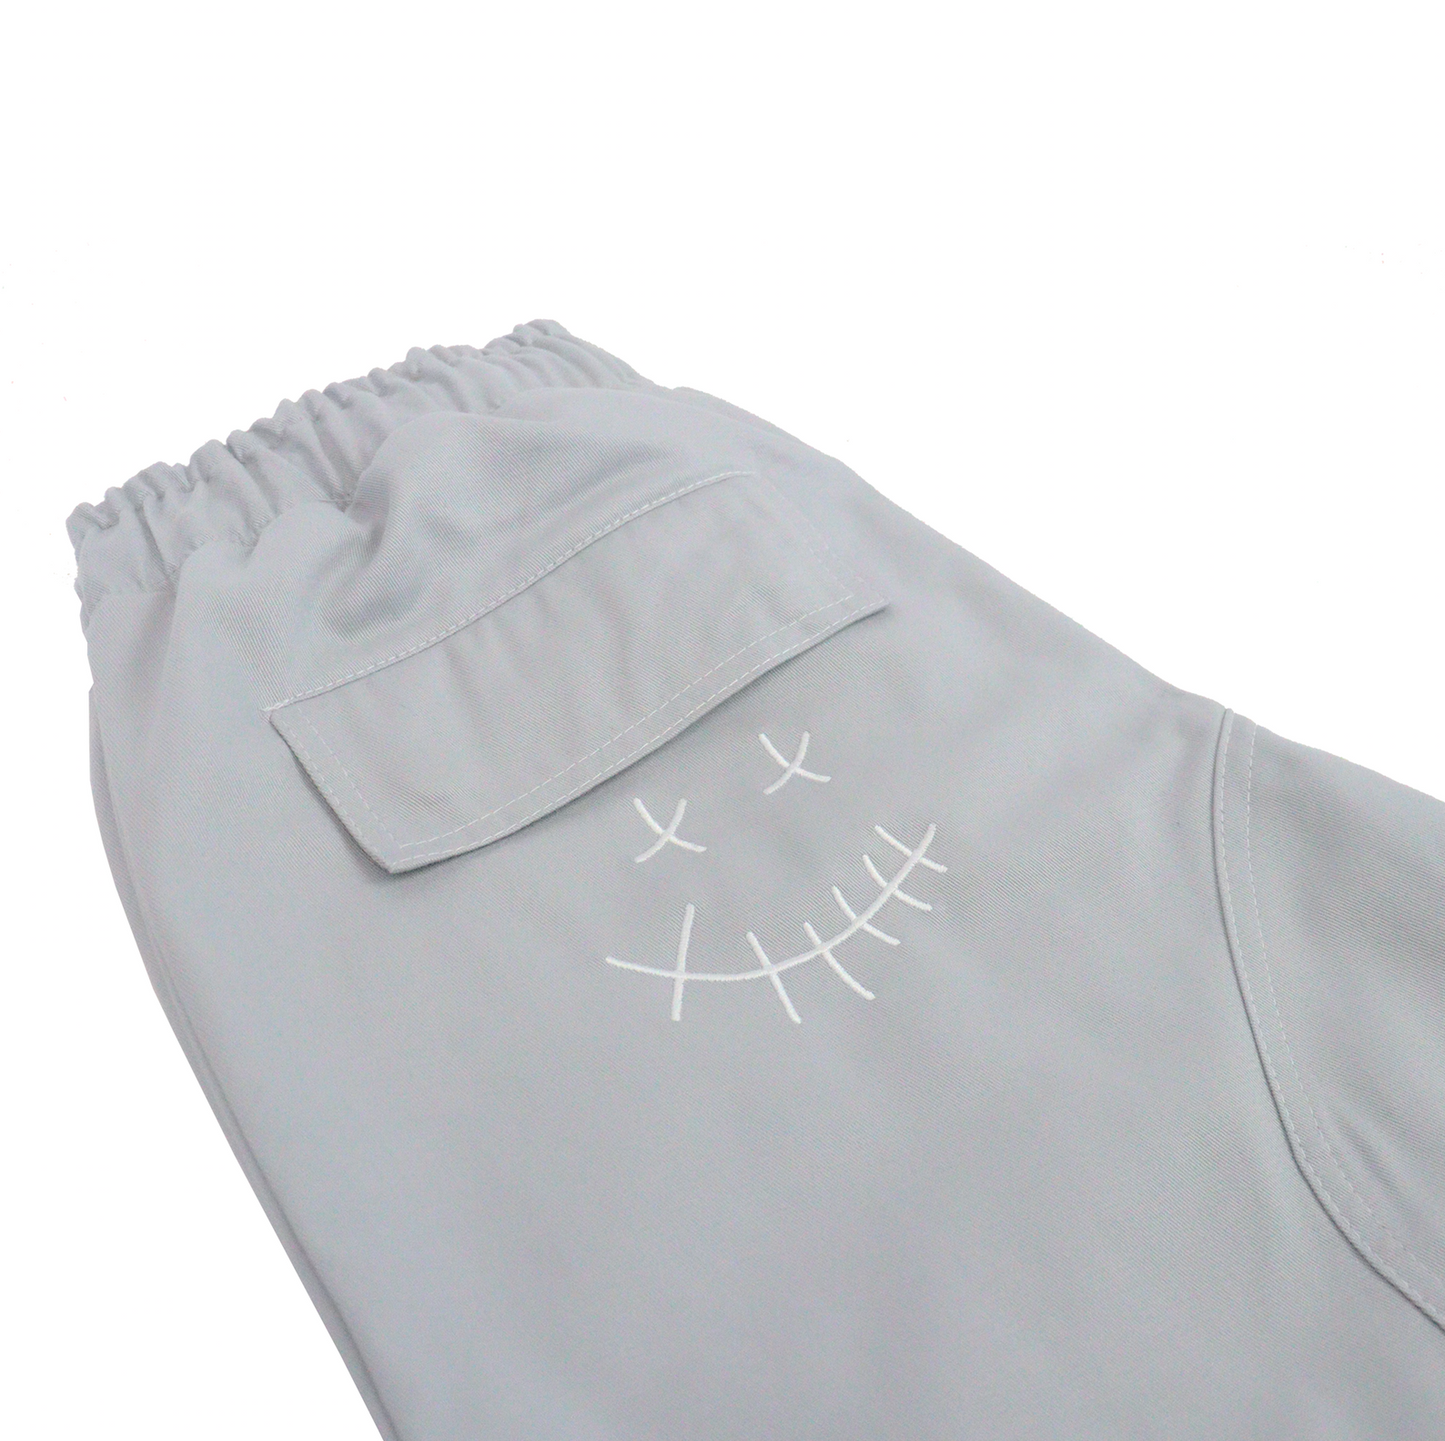 UTILITY SHORTS (CLAY GREY) - CLEARANCE